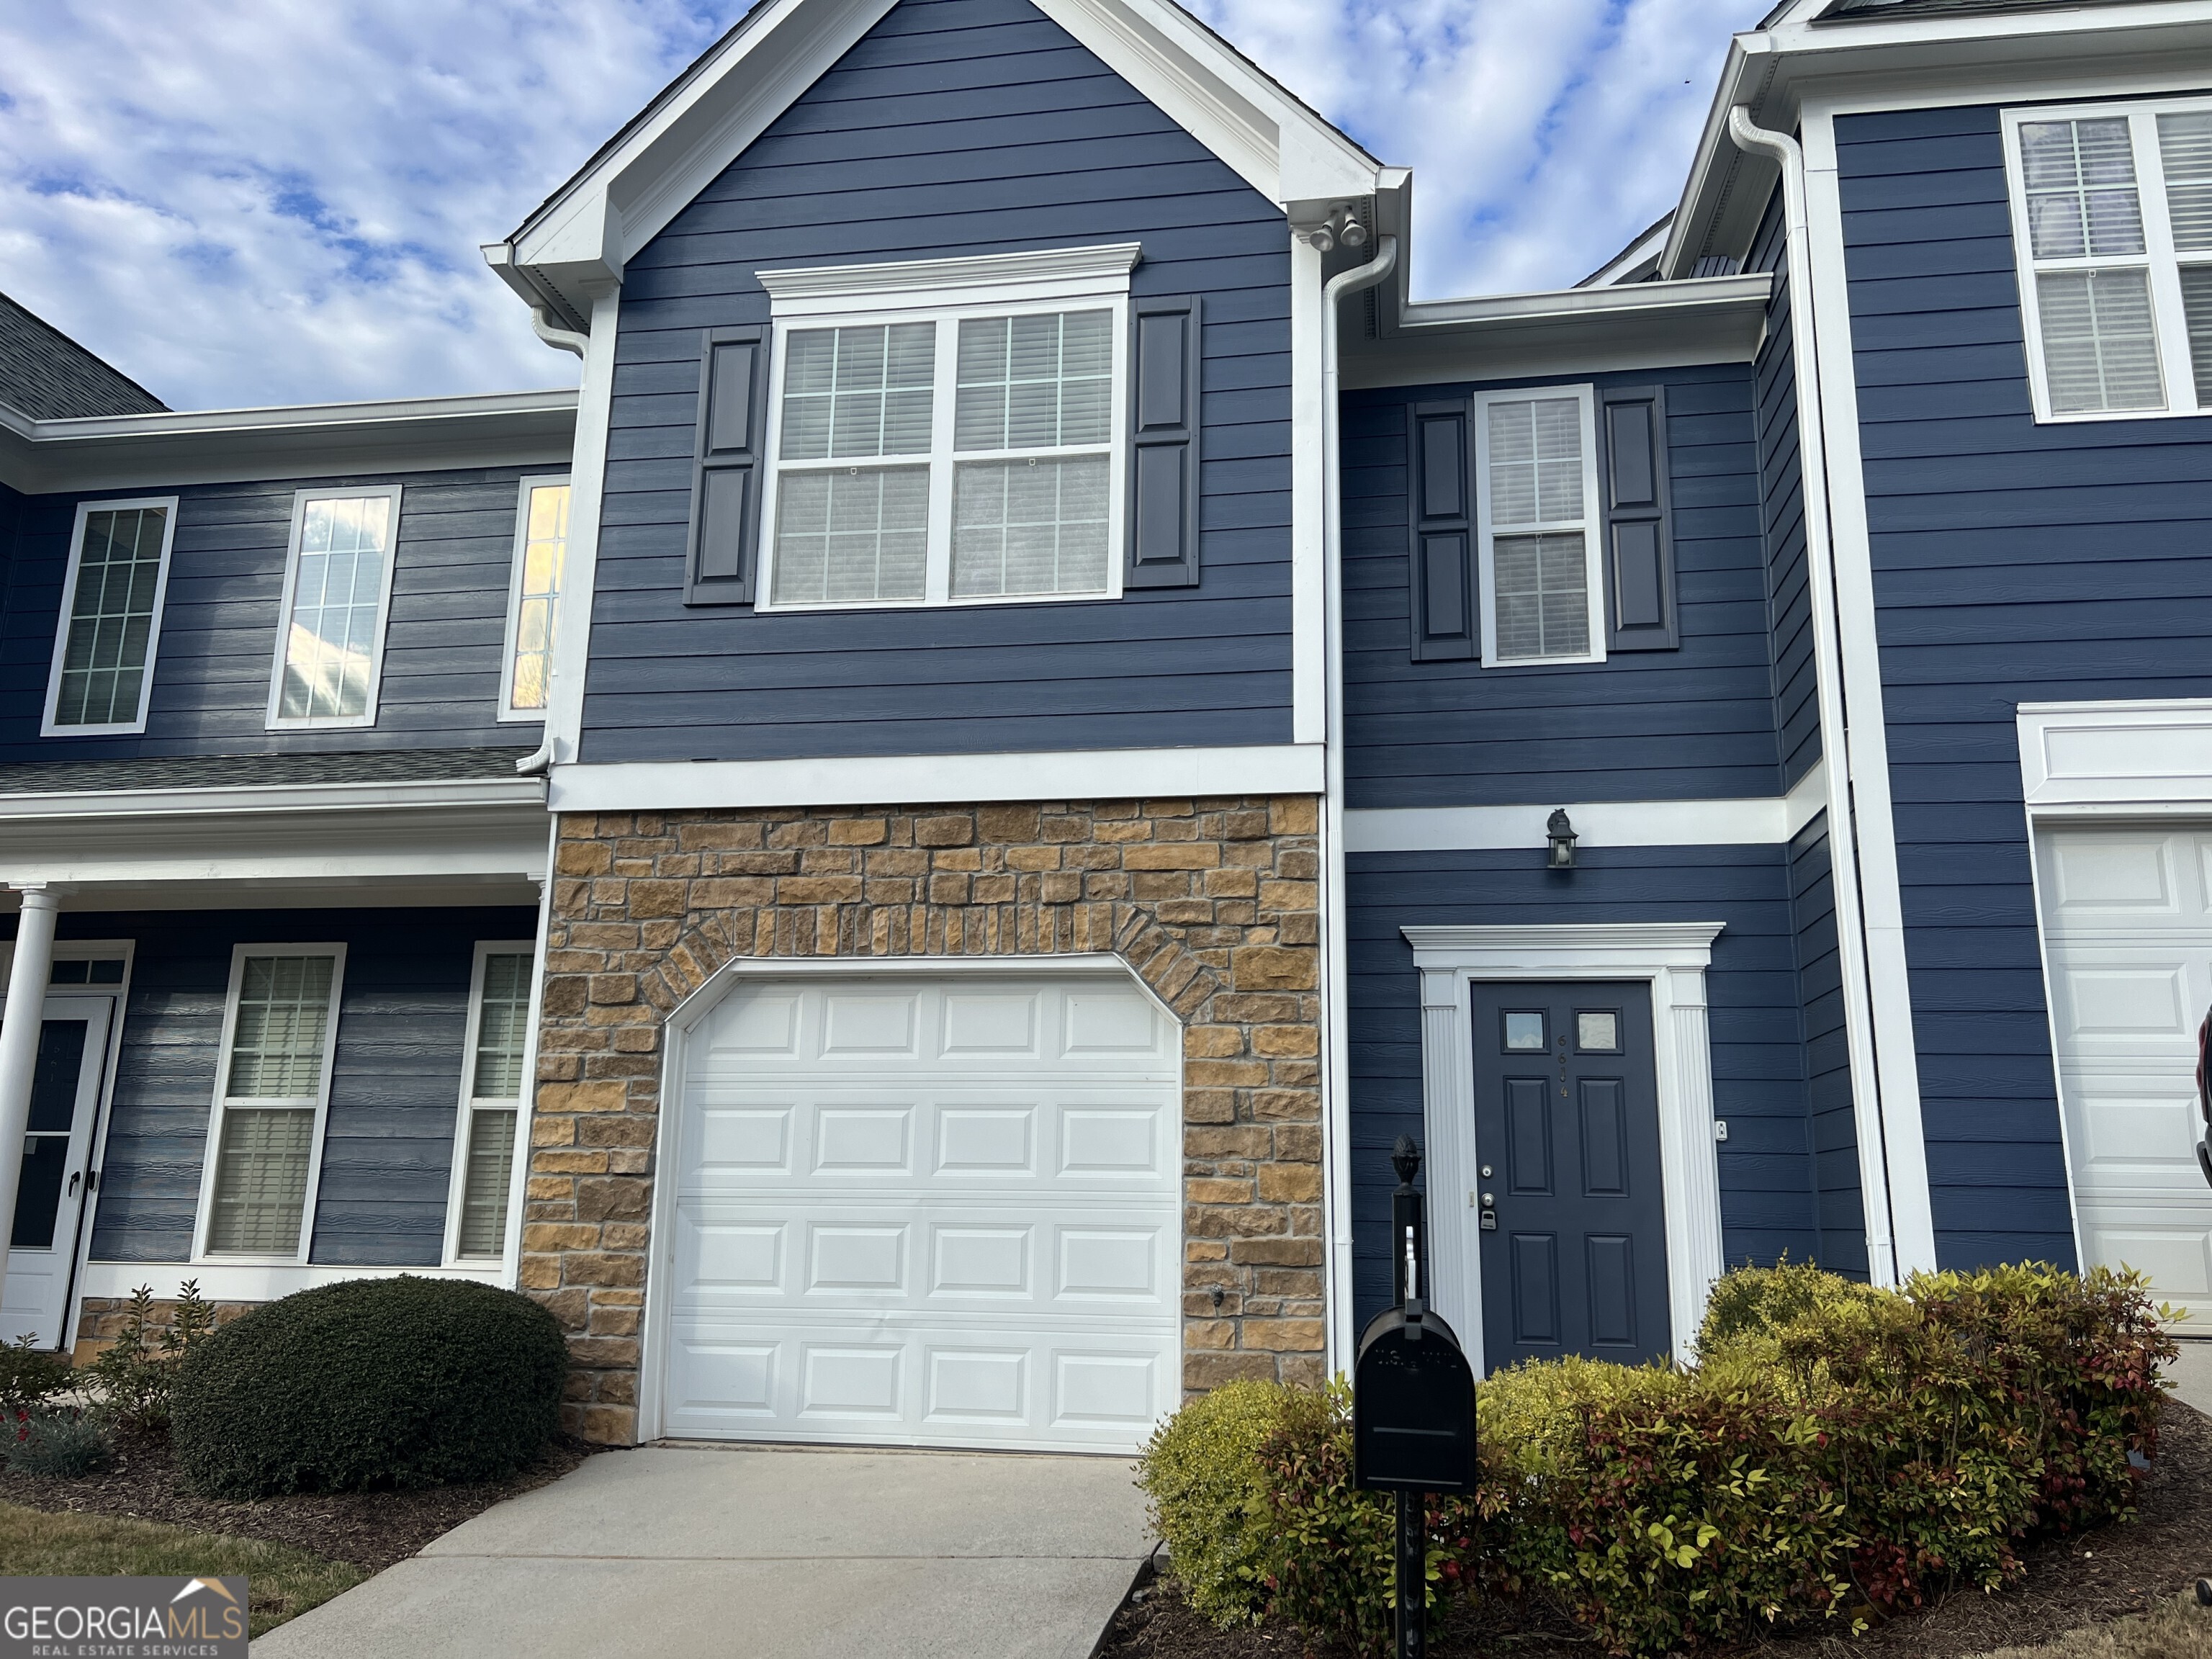 View Flowery Branch, GA 30542 townhome